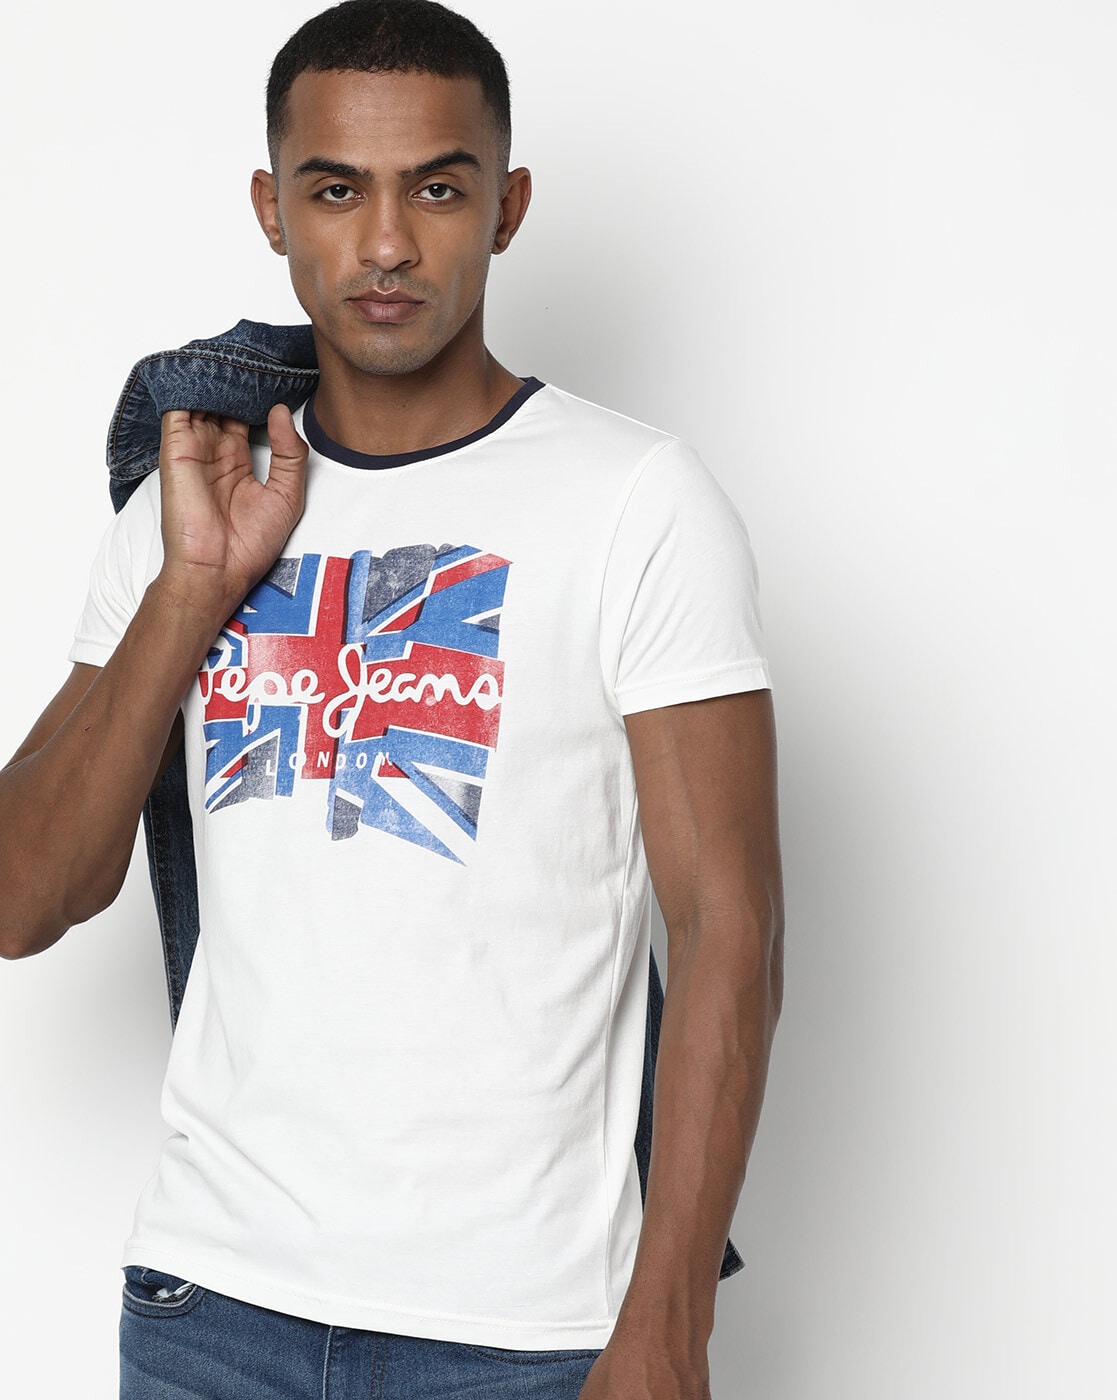 Tshirts Men Buy Off-White by for Jeans Pepe Online